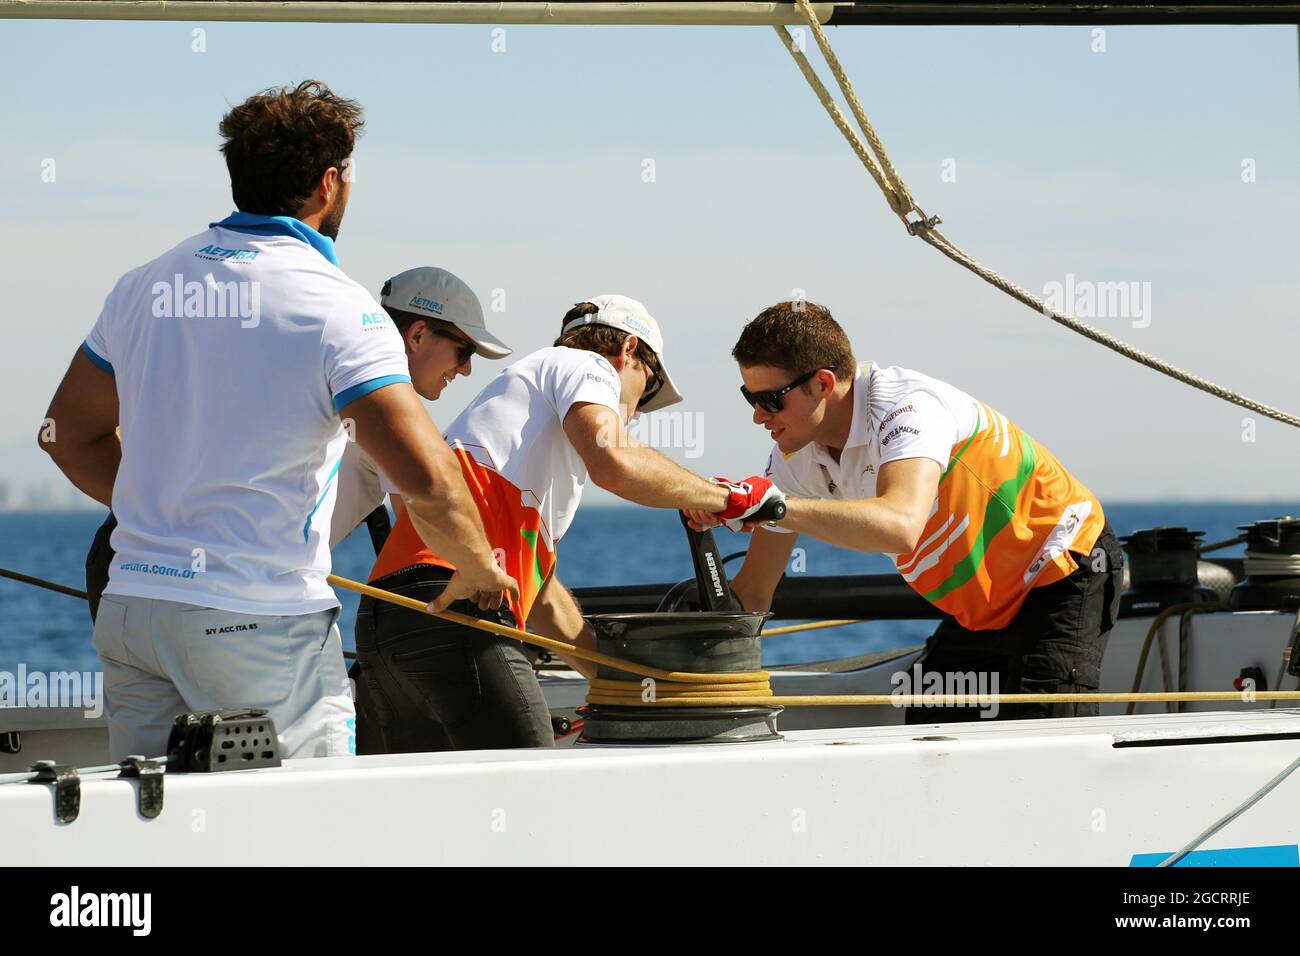 (L to R): Nico Hulkenberg (GER) Sahara Force India F1 and Paul di Resta (GBR) Sahara Force India F1 on the Aethra America's Cup Boat. European Grand Prix, Thursday 21st June 2012. Valencia, Spain. Stock Photo